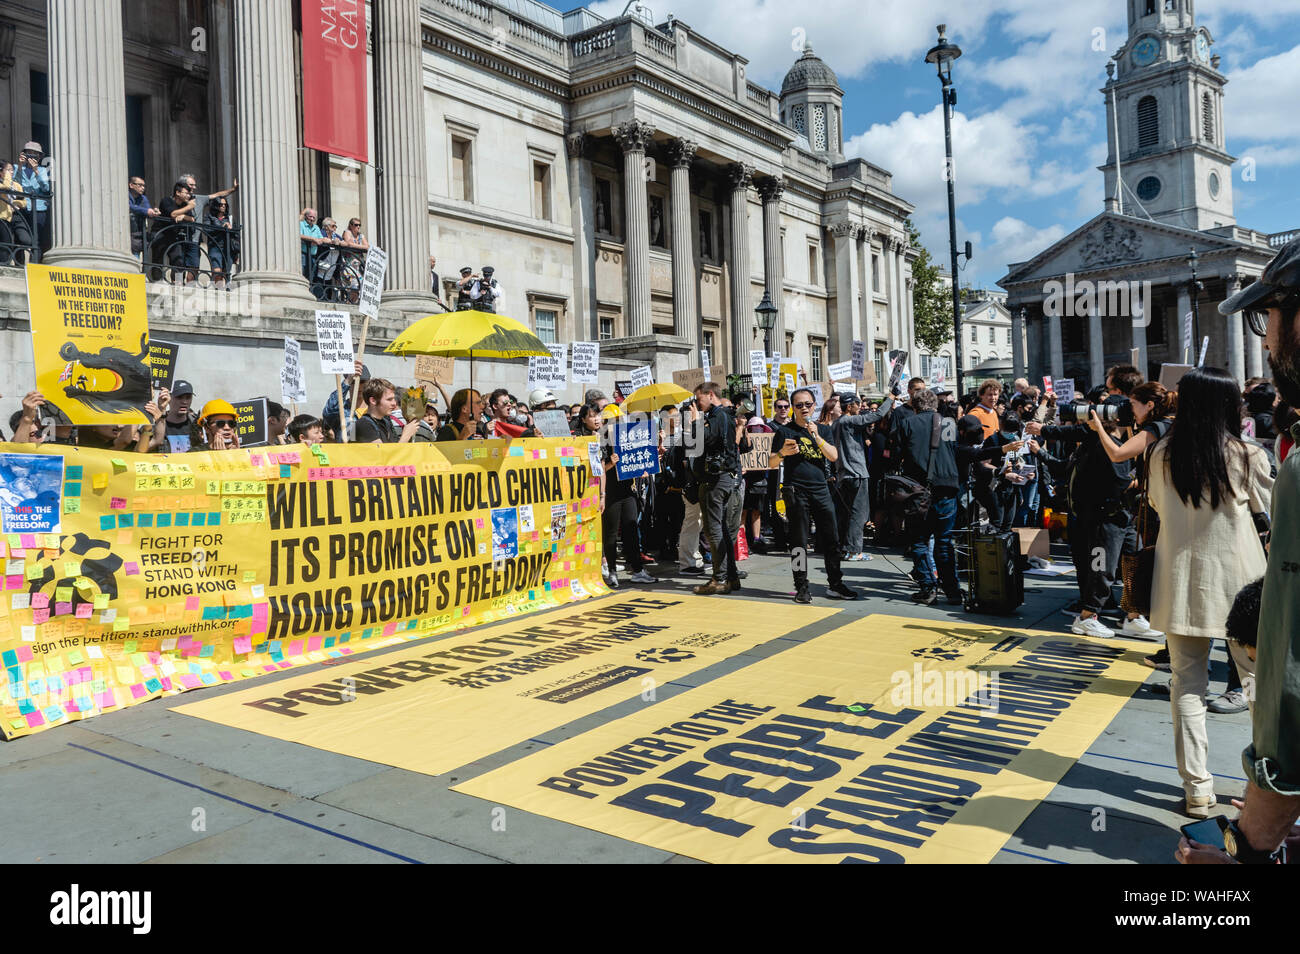 London, United Kingdom - August 17,  2019: Huge banners on display at the UK Solidarity with Hong Kong rally. Stock Photo